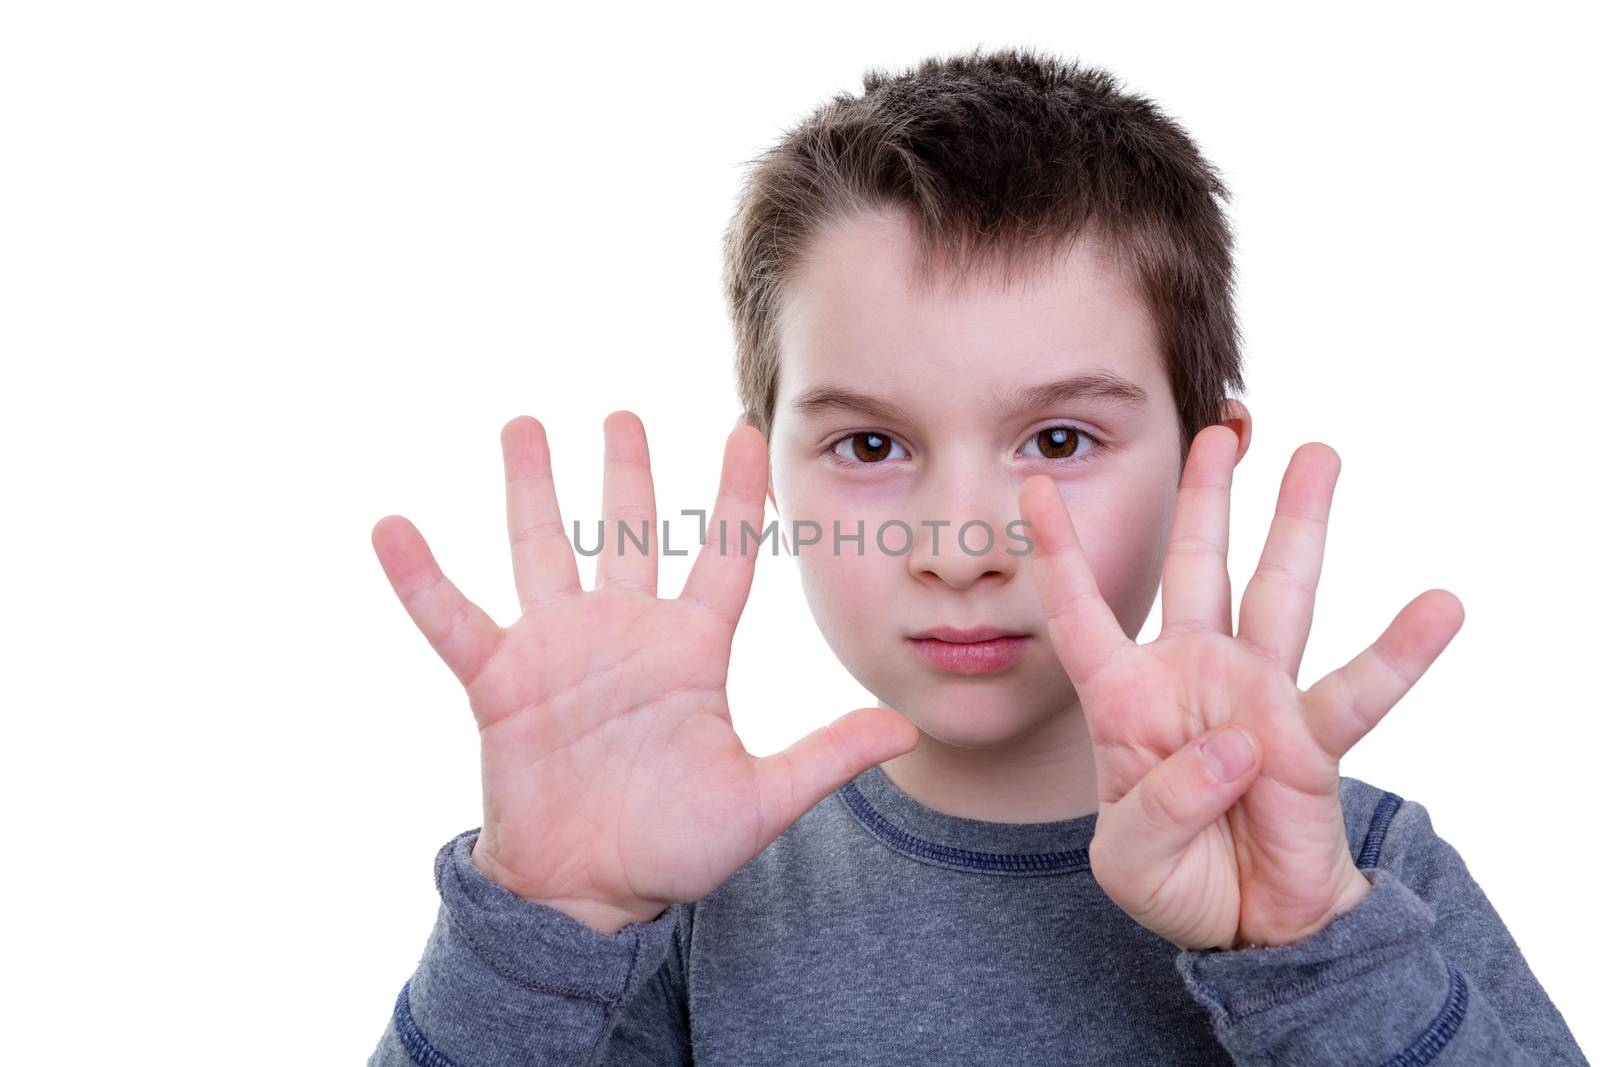 Cute serious little boy gesturing with eight fingers on two hands as if to count or display a symbol